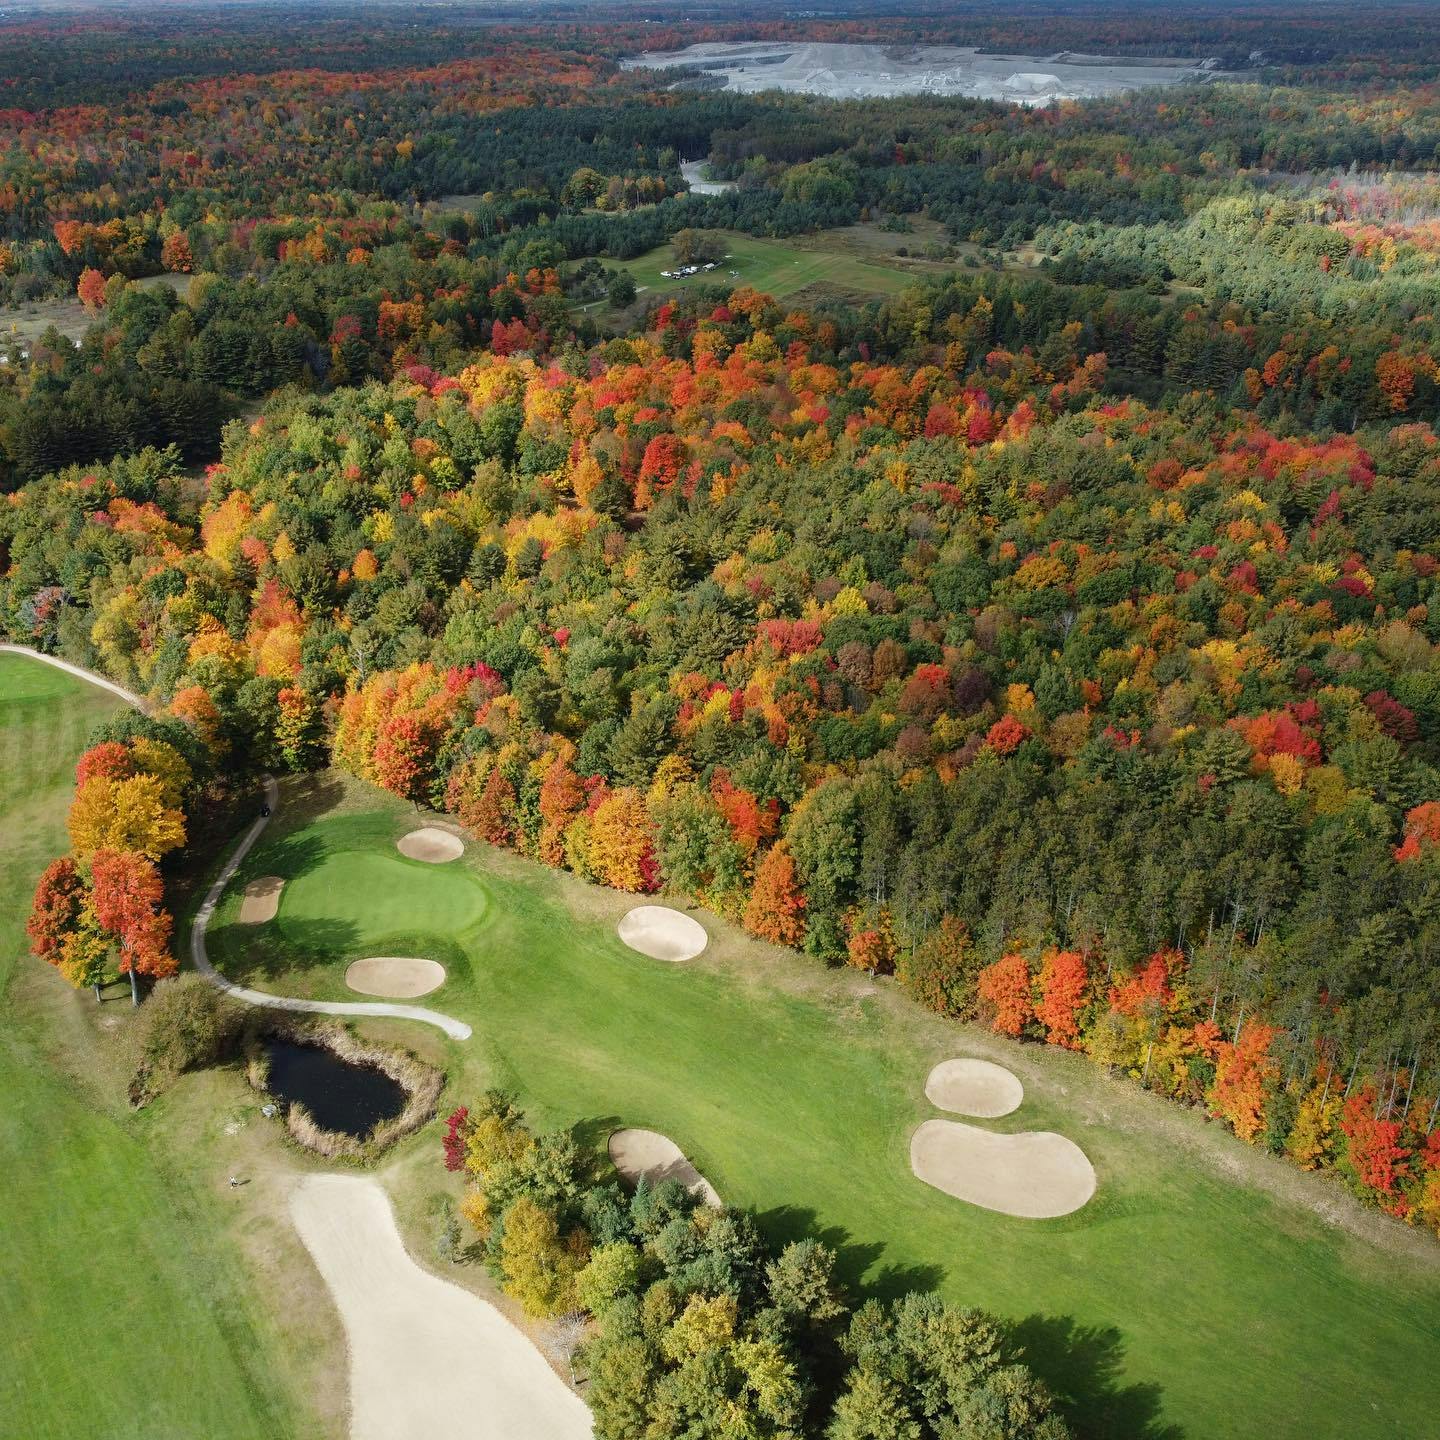 The colours are fully out for thanksgiving weekend 👌 #FallGolf